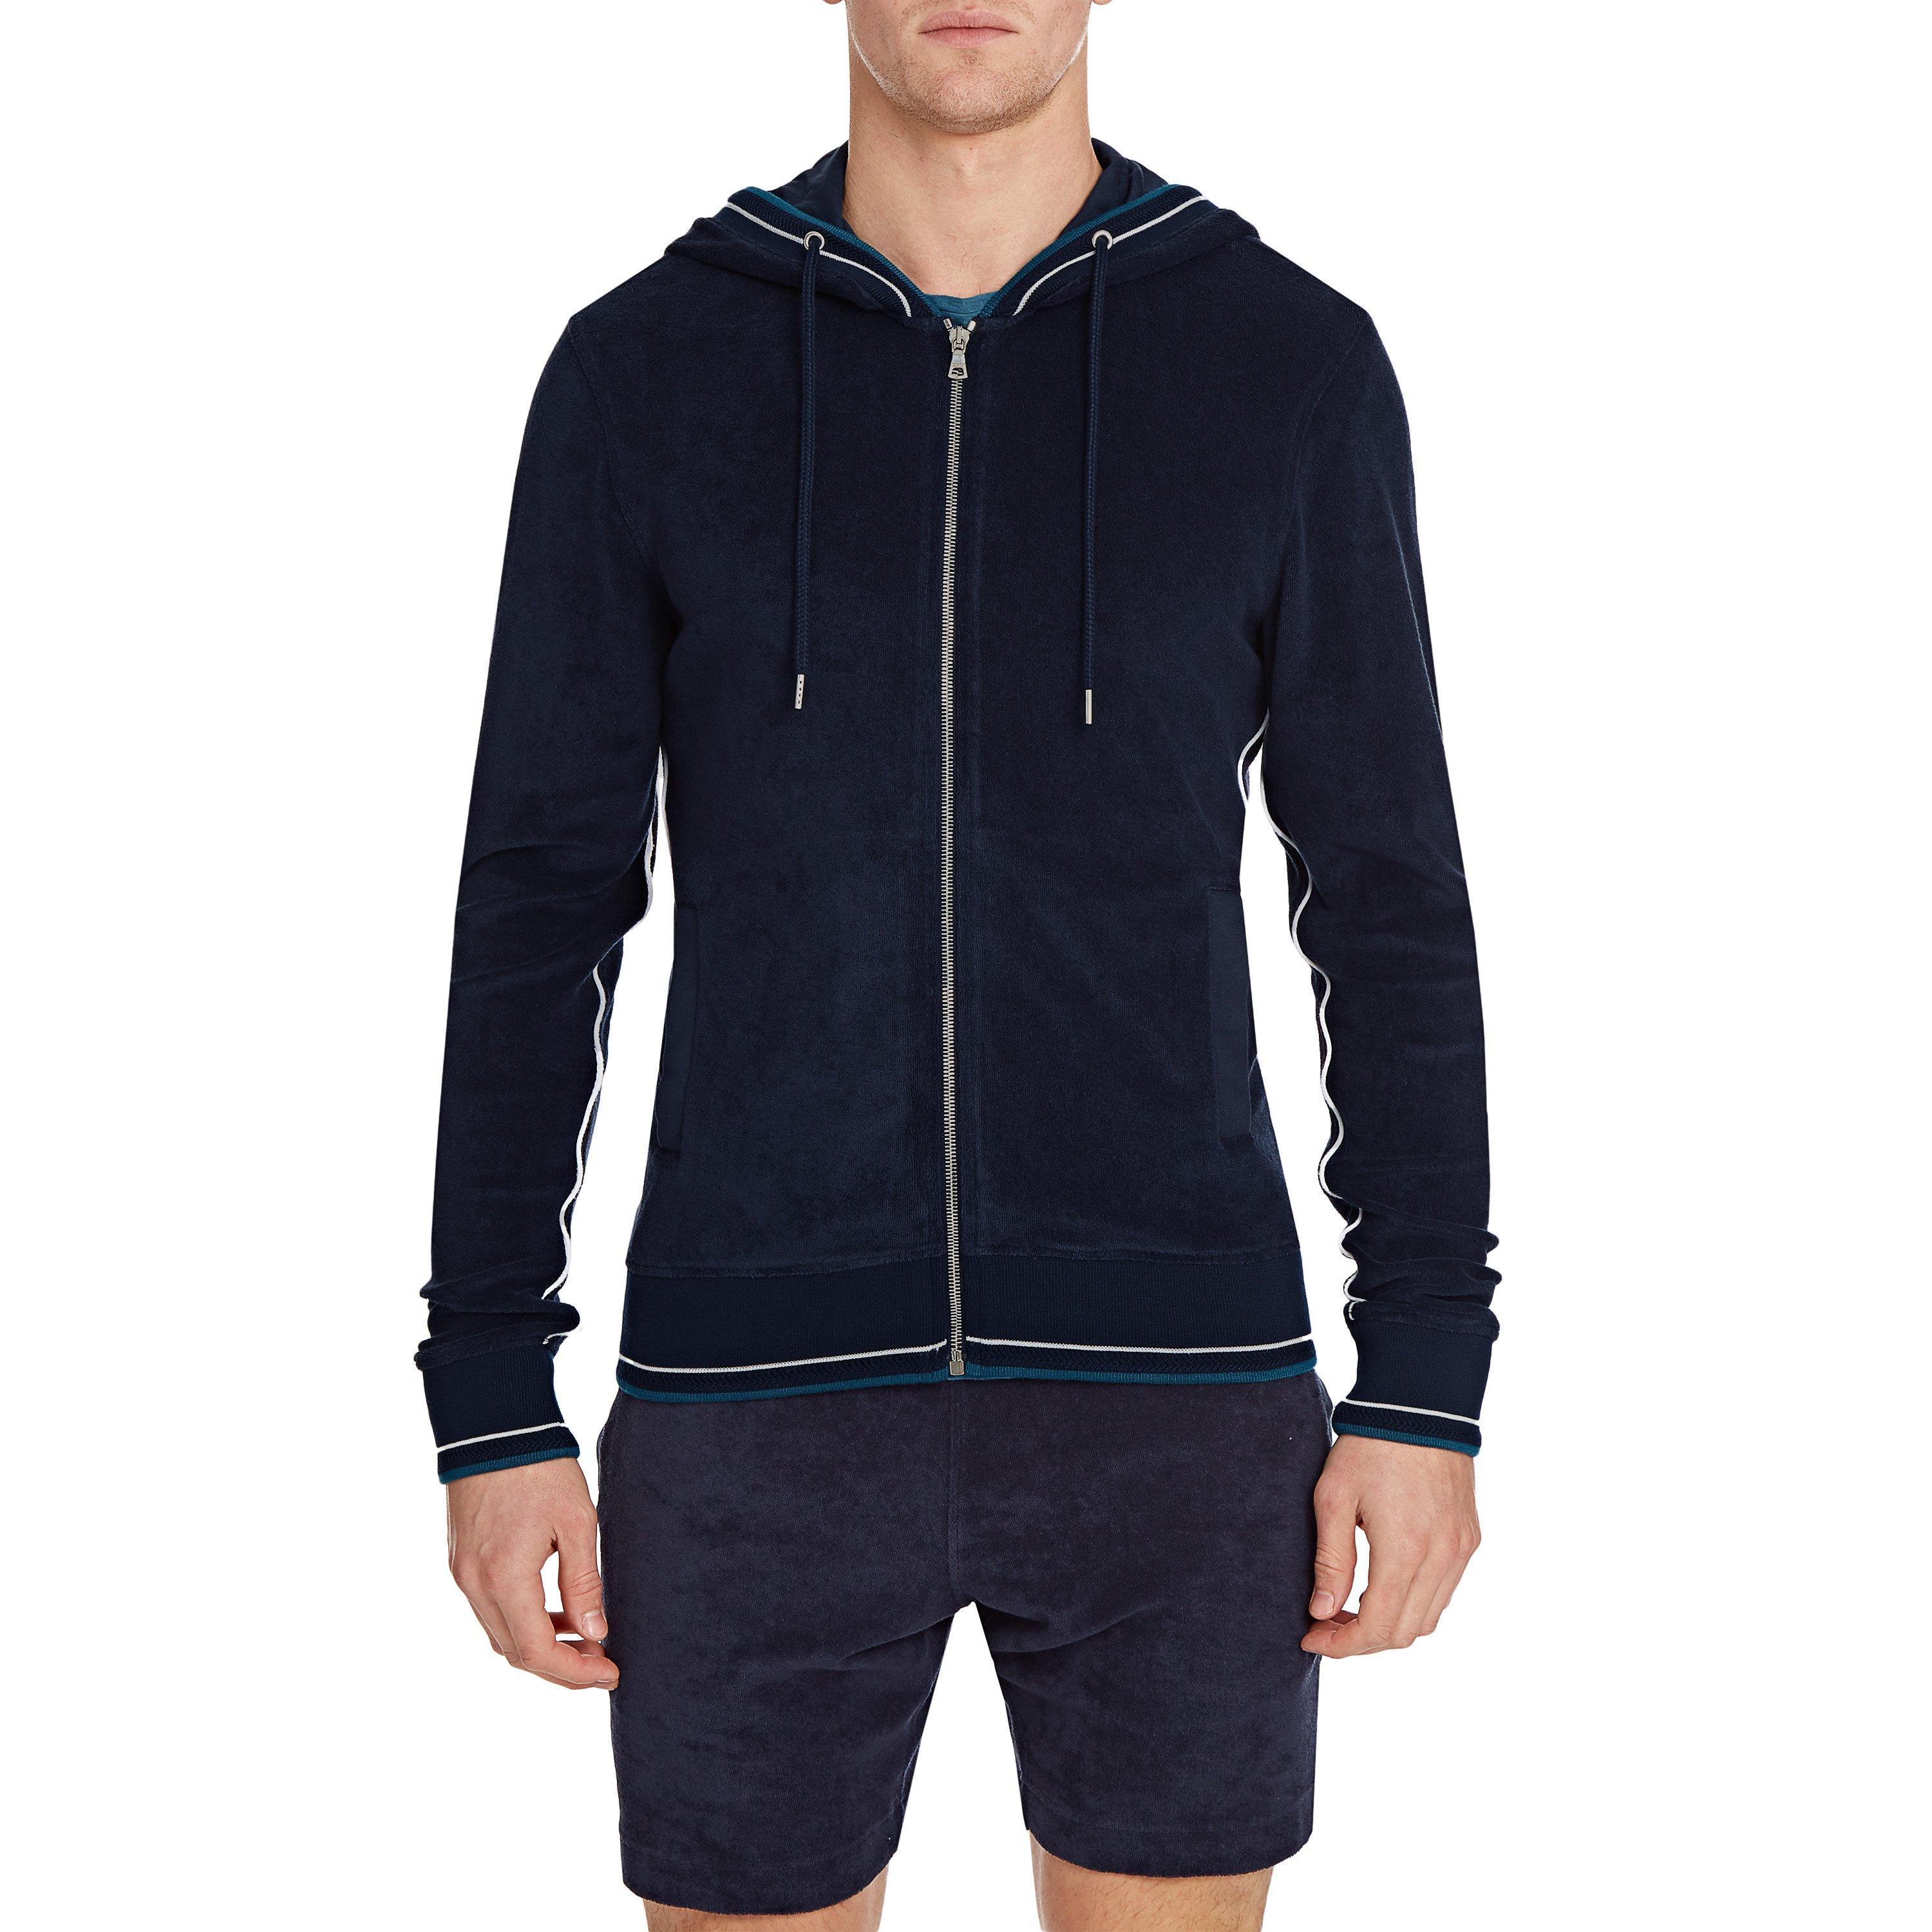 Orlebar Brown Navy Classic Fit Hooded Sweatshirt in Blue for Men - Lyst